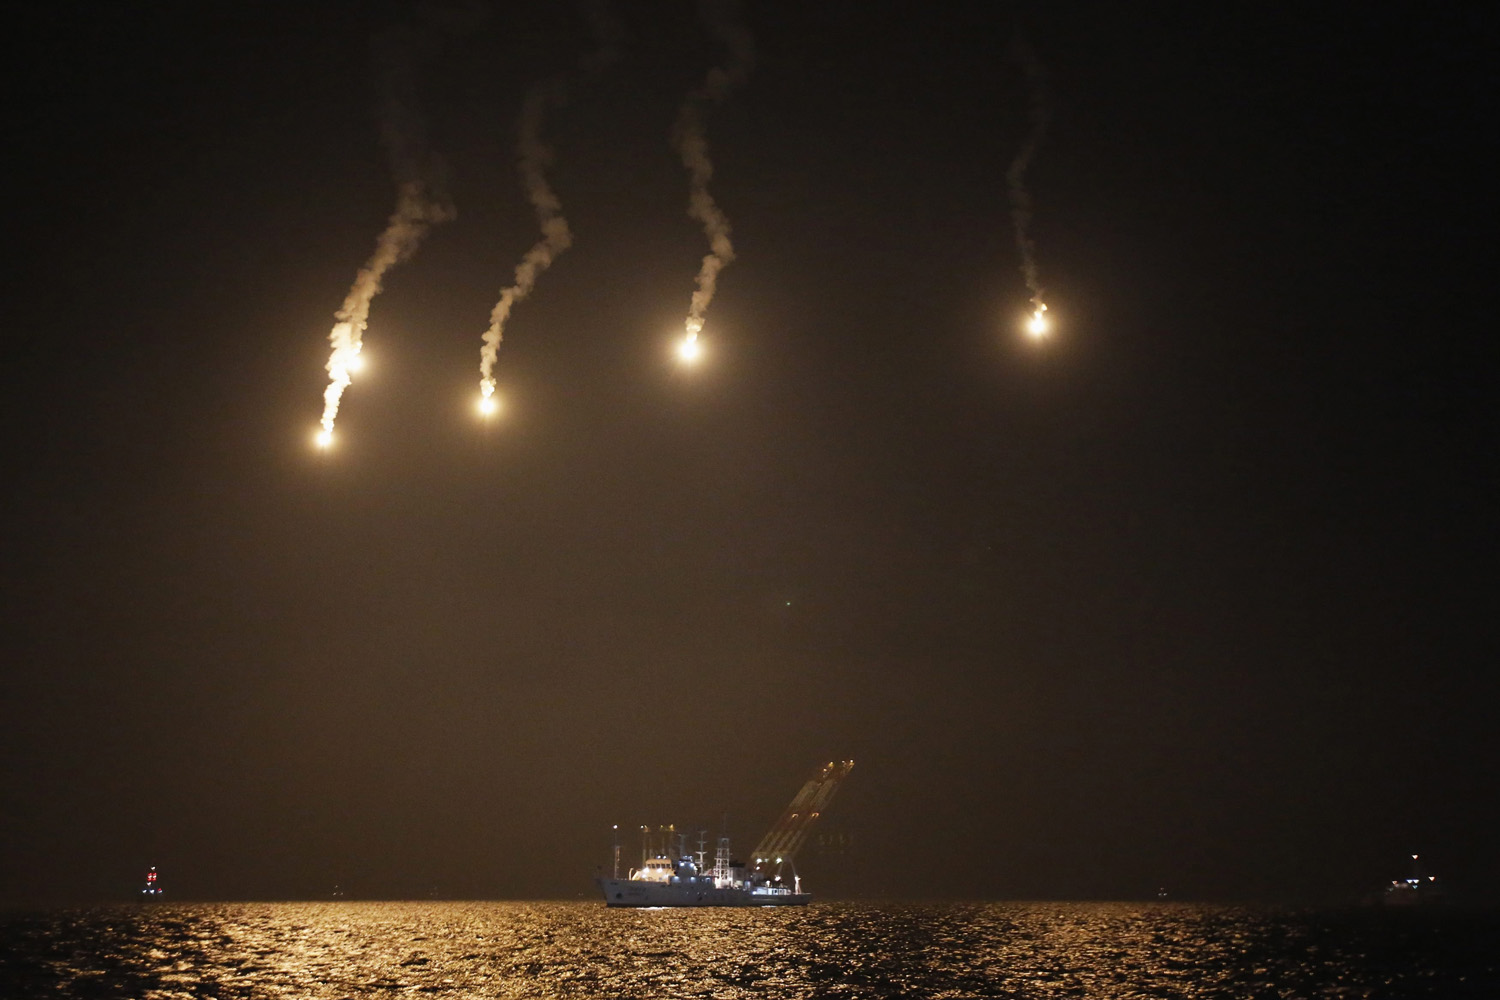 Apr. 22, 2014. Lighting flares are released over the sea off Jindo where the capsized passenger ship Sewol sank. The ferry sank last Wednesday on a routine trip south from the port of Incheon to the traditional honeymoon island of Jeju.